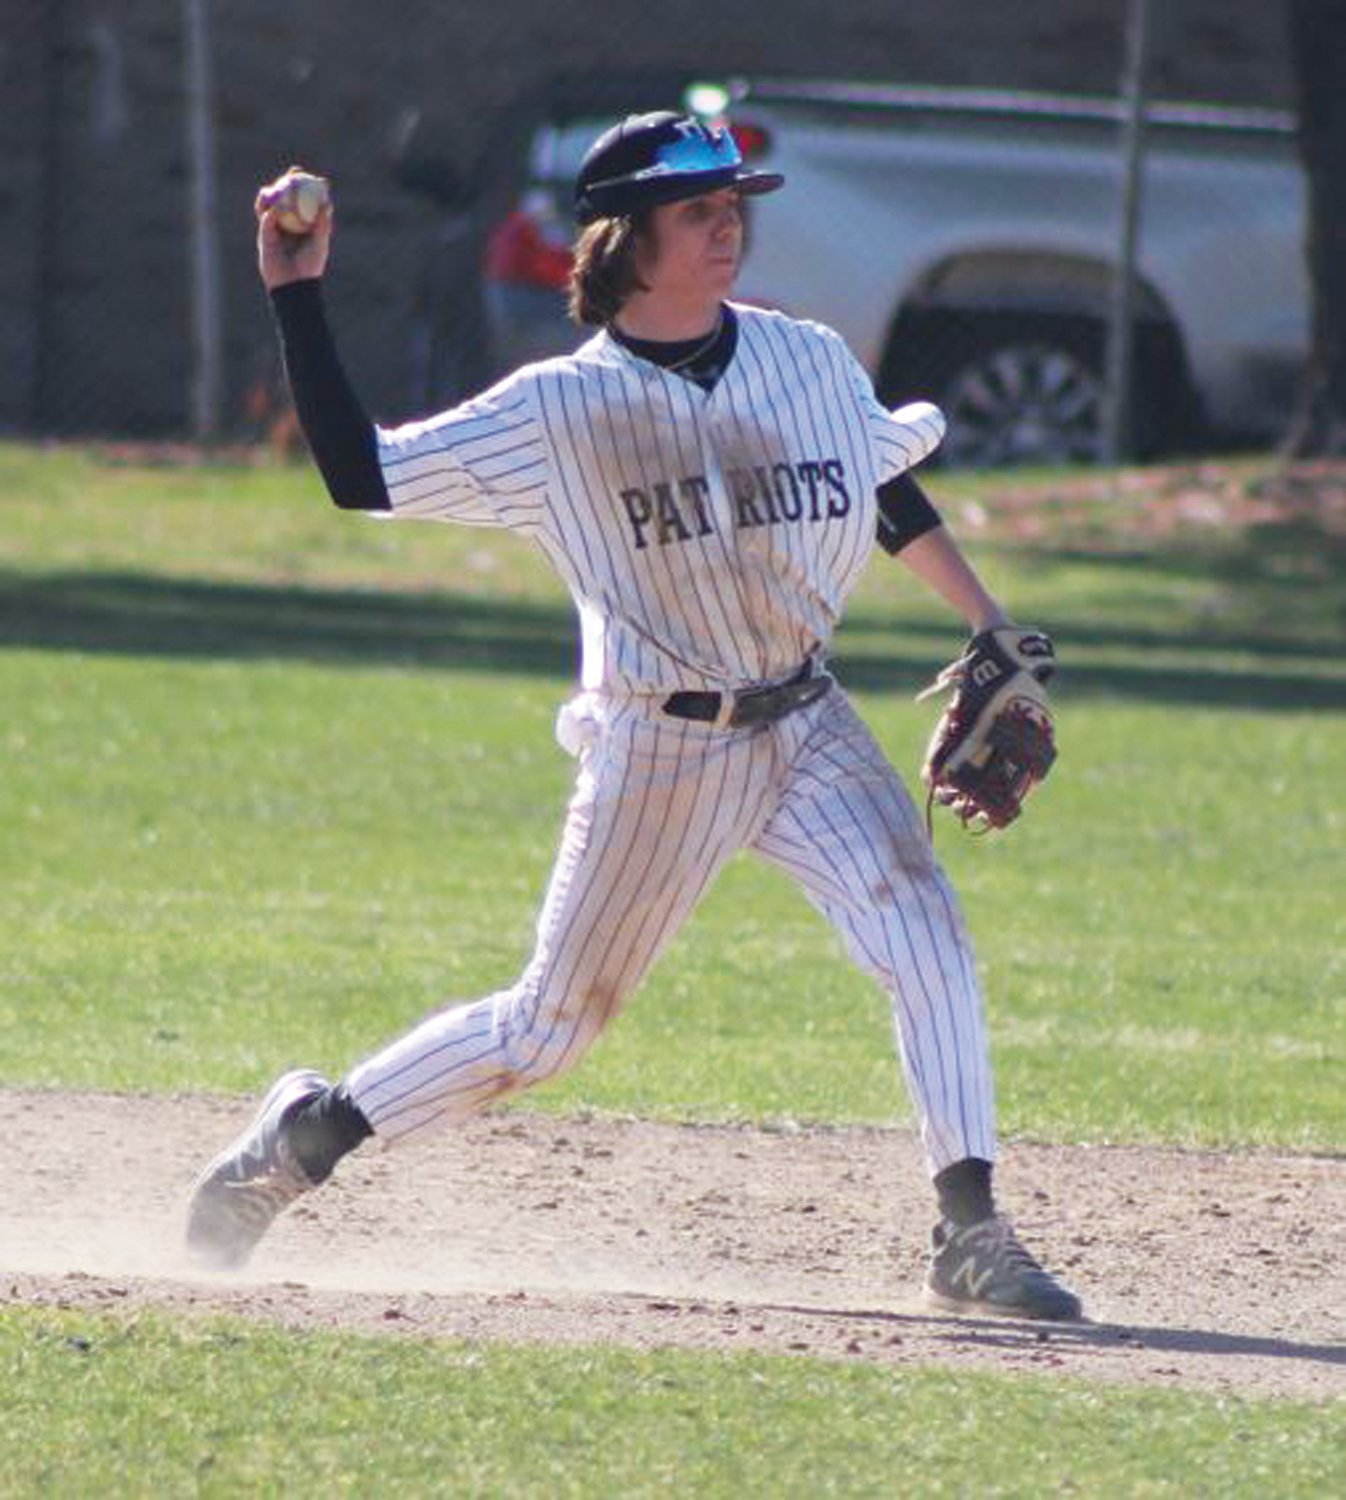 THE THROW TO FIRST: Pilgrim’s Dylan Bourret makes a play to first on Monday.